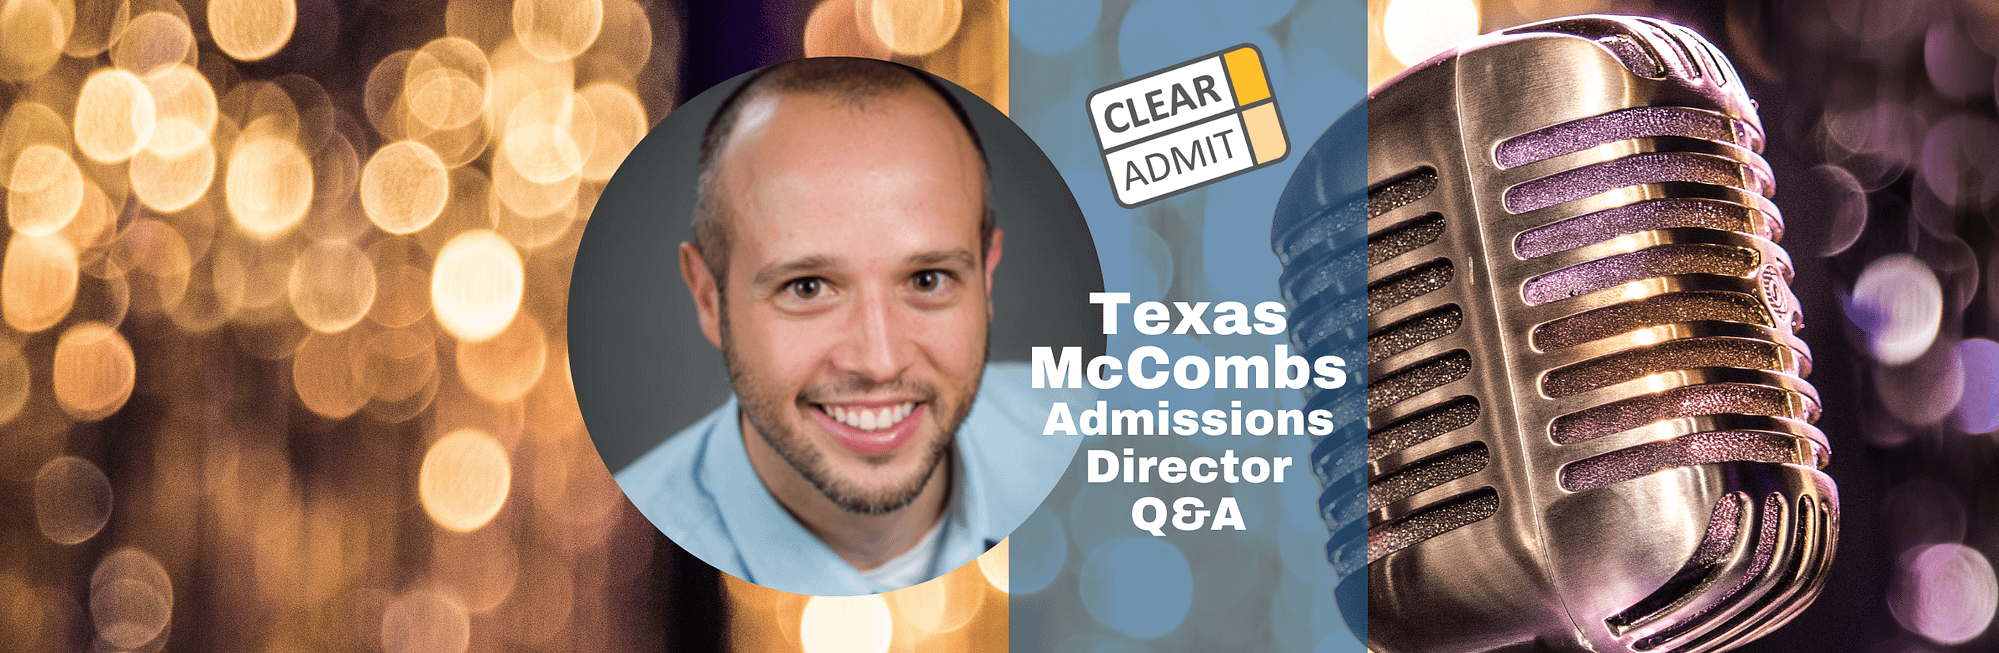 texas mccombs mba admissions